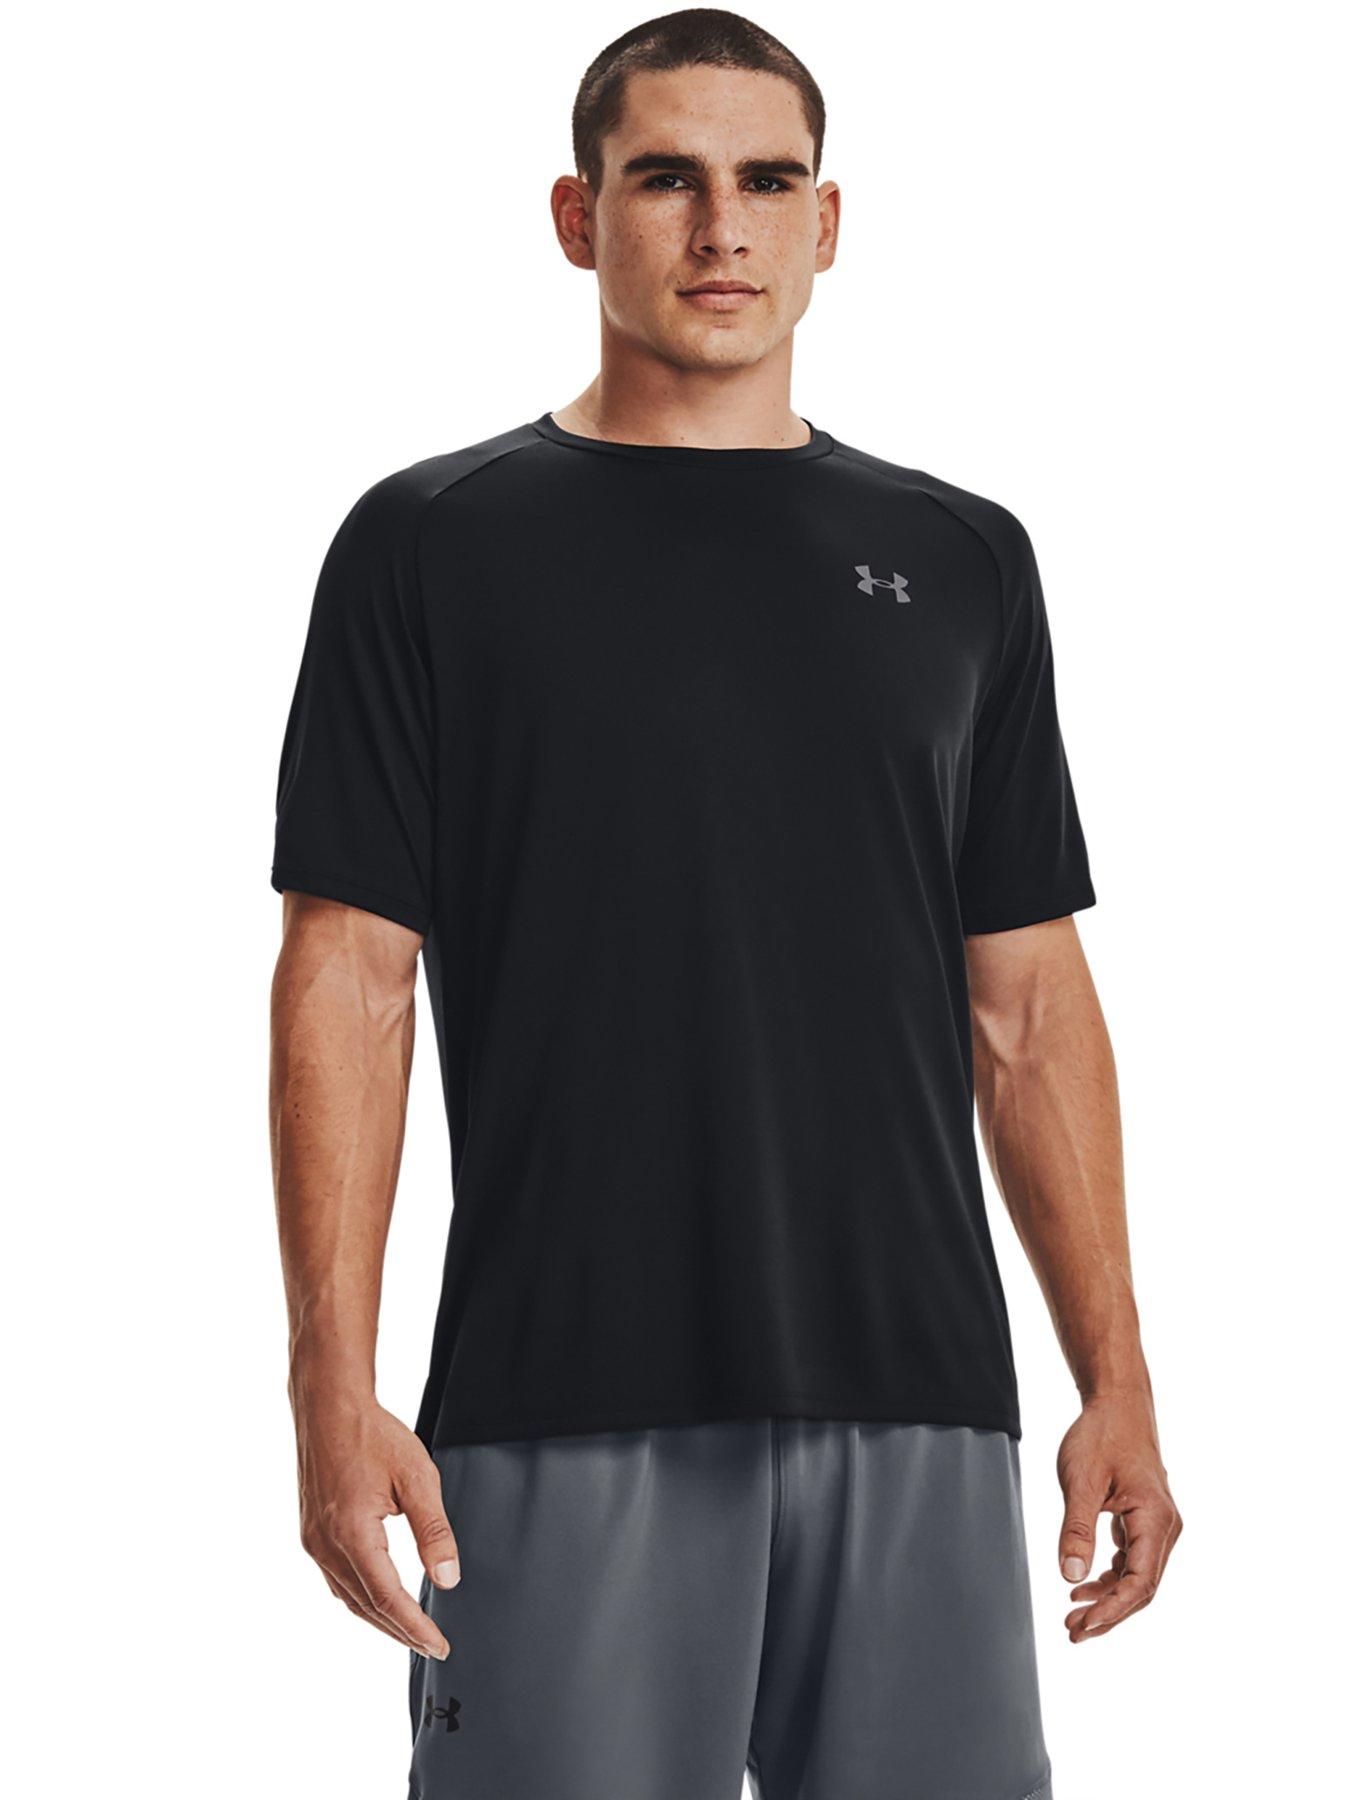 Black Under Armour T Shirts - almoire